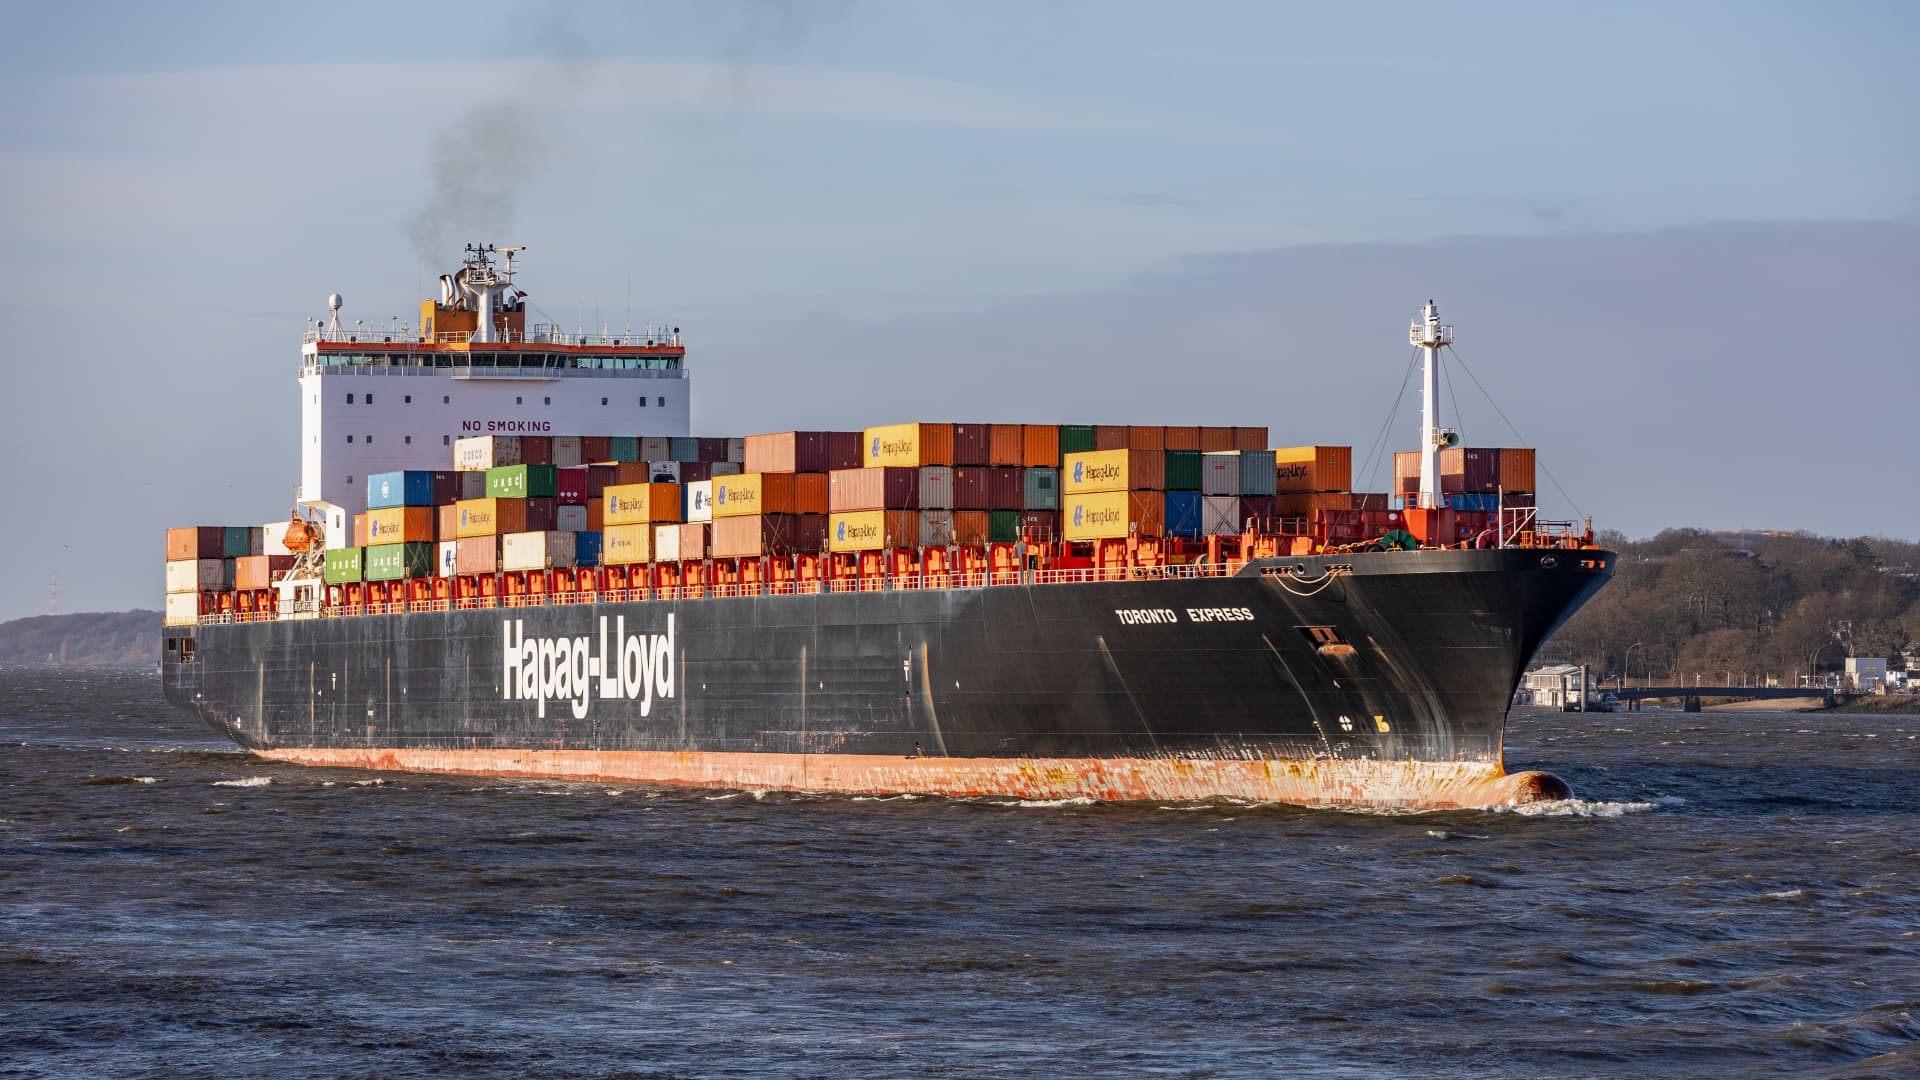 CEO of Hapag-Lloyd, one of world's top ocean shippers, says the outlook has changed for the global economy